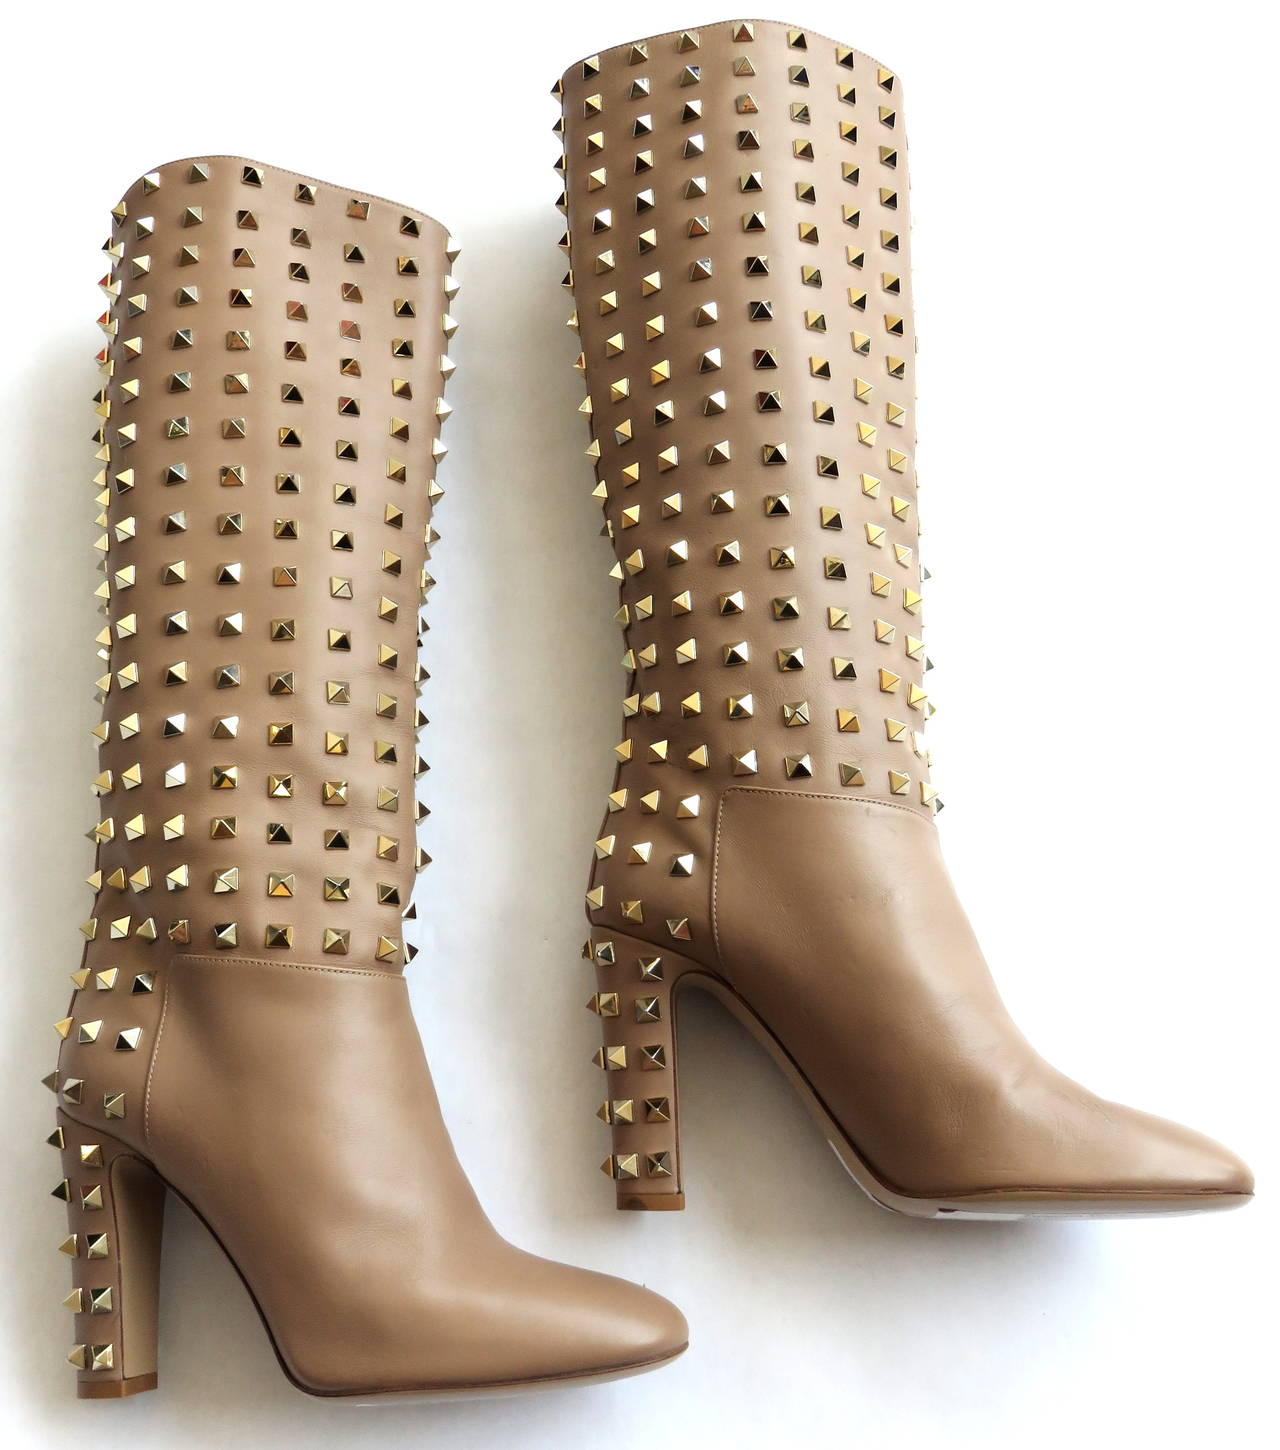 Never worn, 2014, VALENTINO Rockstud Leather knee-high boots.

Goldtone studs upgrade this impeccably crafted leather silhouette, elevated by a powerful heel. 

Original retail price: $2,495.00

*MEASUREMENTS*

IT size 37 = US